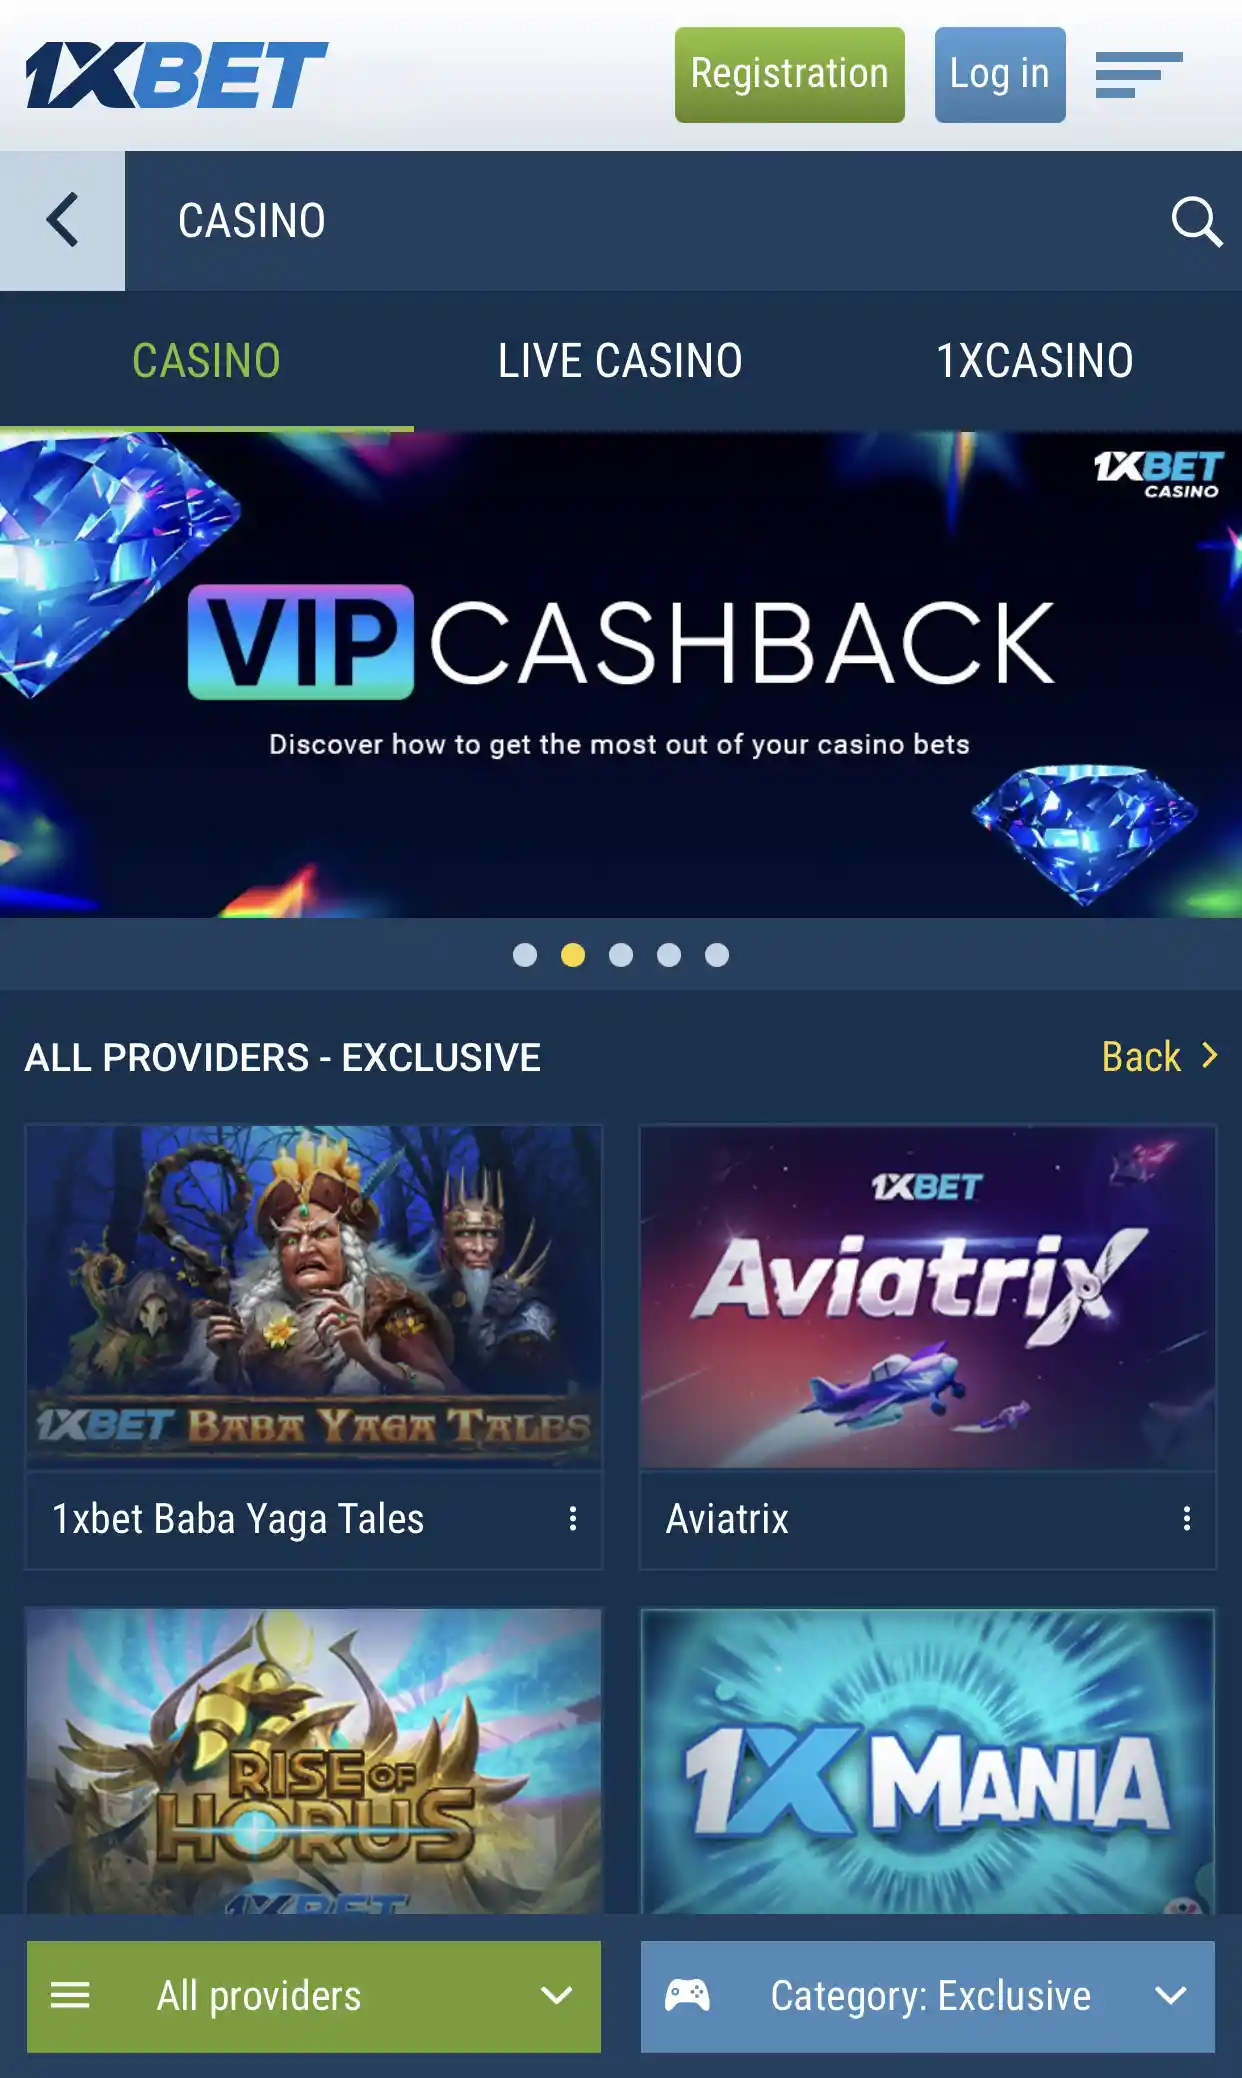 1xbet casino offers not only popular but also exclusive games.